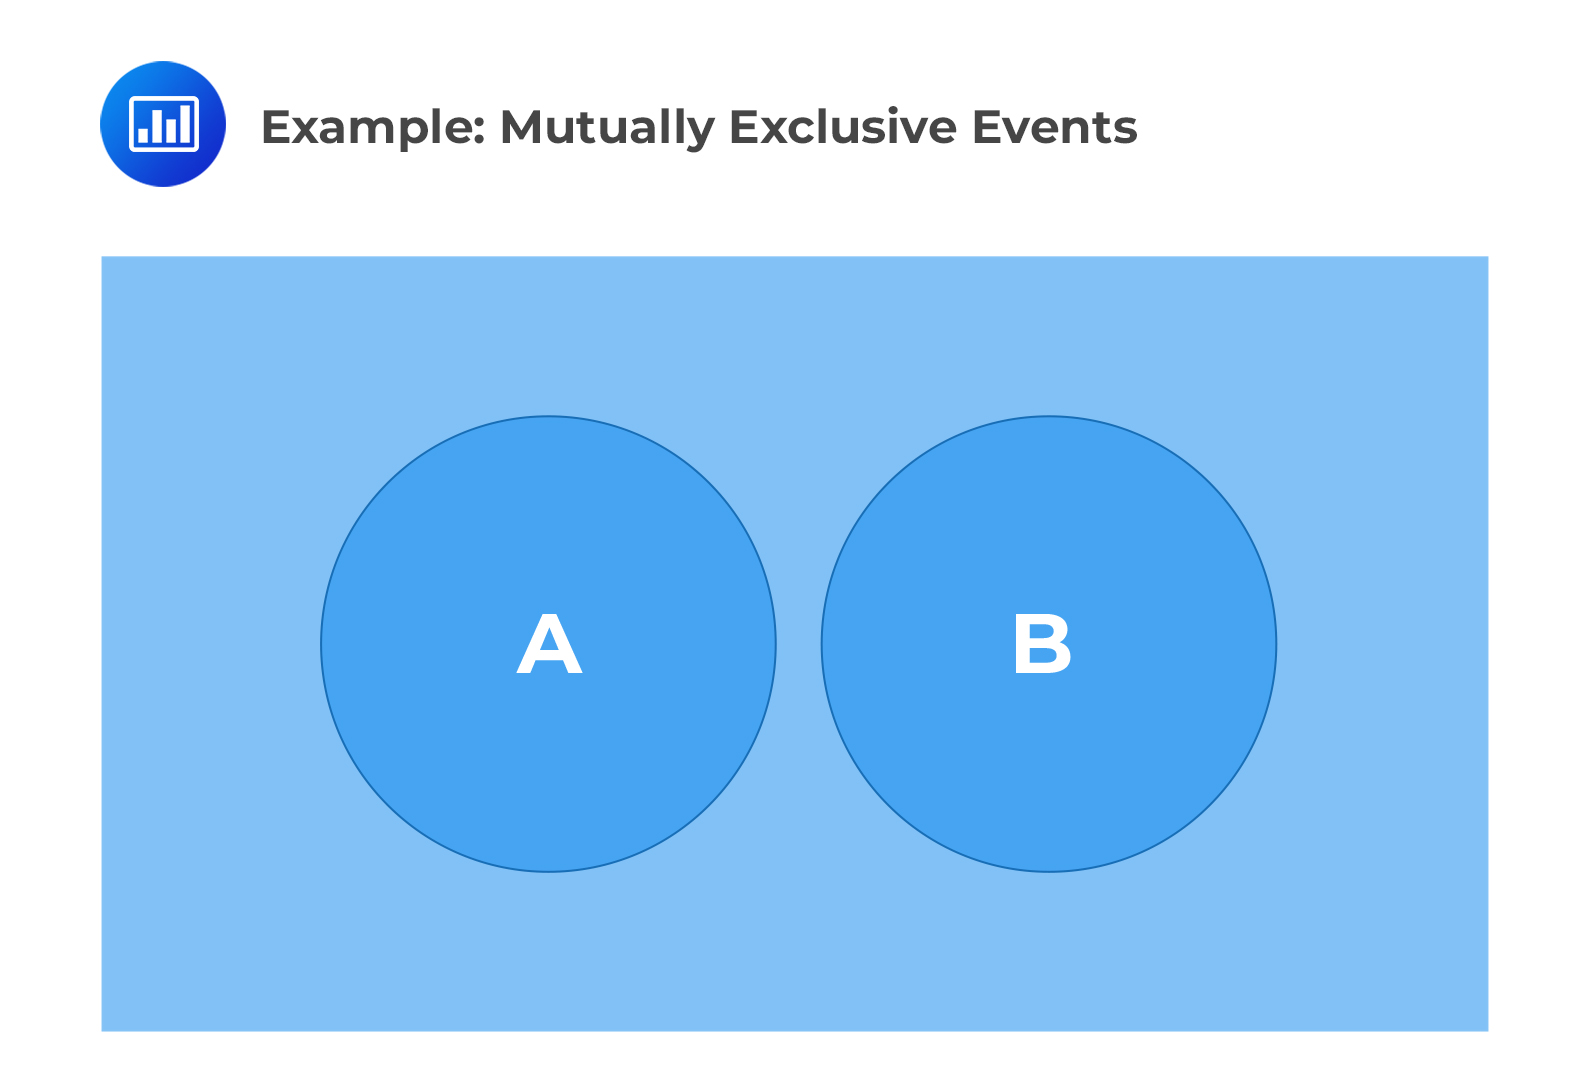 Example: Mutually Exclusive Events